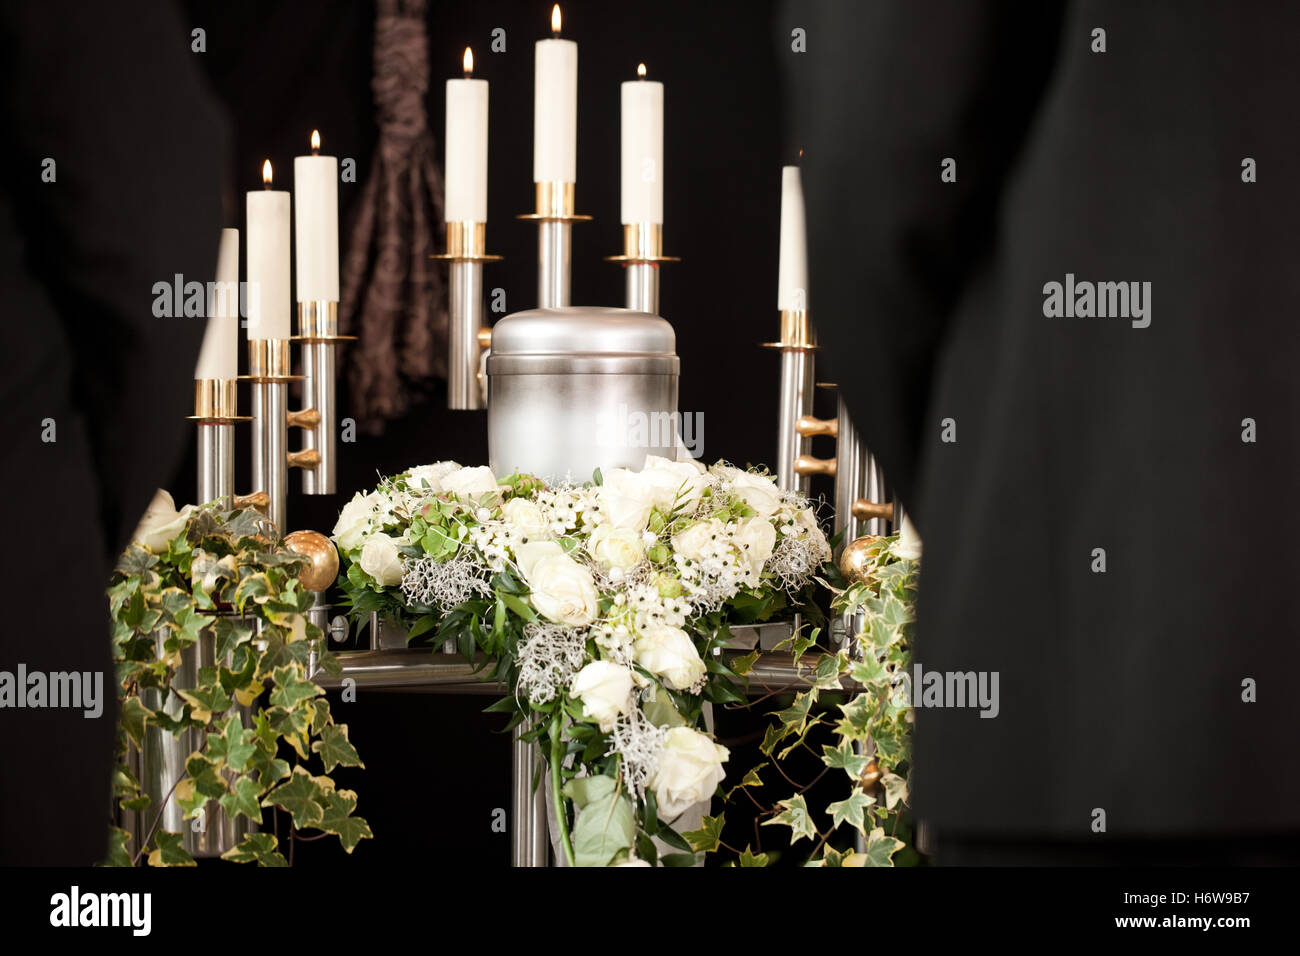 death, cemetery, mourning, sorrow, burial, urn, funeral, humans, human beings, Stock Photo